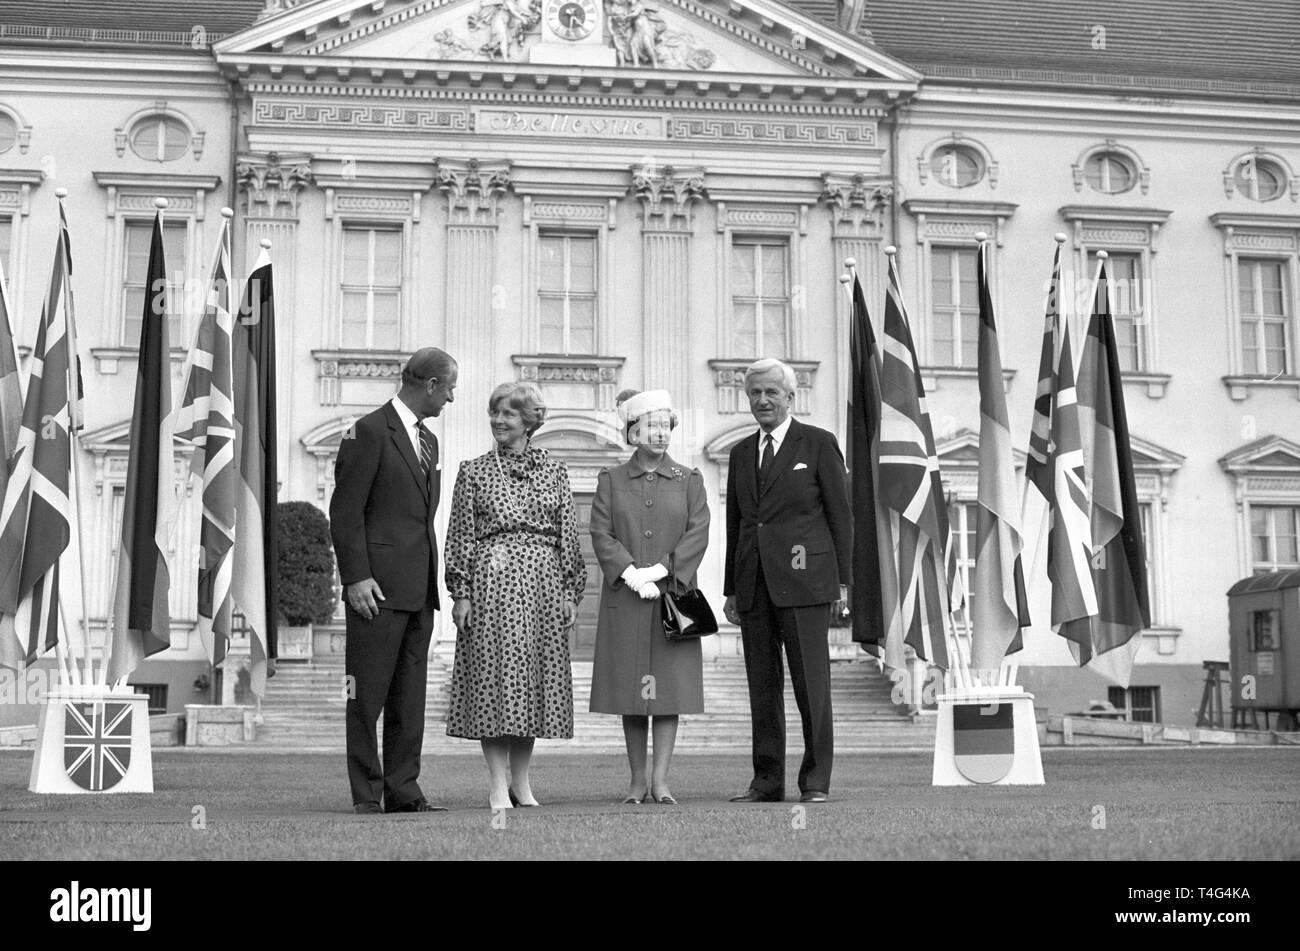 Prince Philip, Marianne von Weizsäcker, Queen Elizabeth II and German president Richard von Weizsäcker (l-r) in front of Castle Bellevue in Berlin on 27 May 1987. The British Queen and her husband stayed in Berlin for a two-day visit on the occasion of the 750th anniversary of Berlin. | usage worldwide Stock Photo